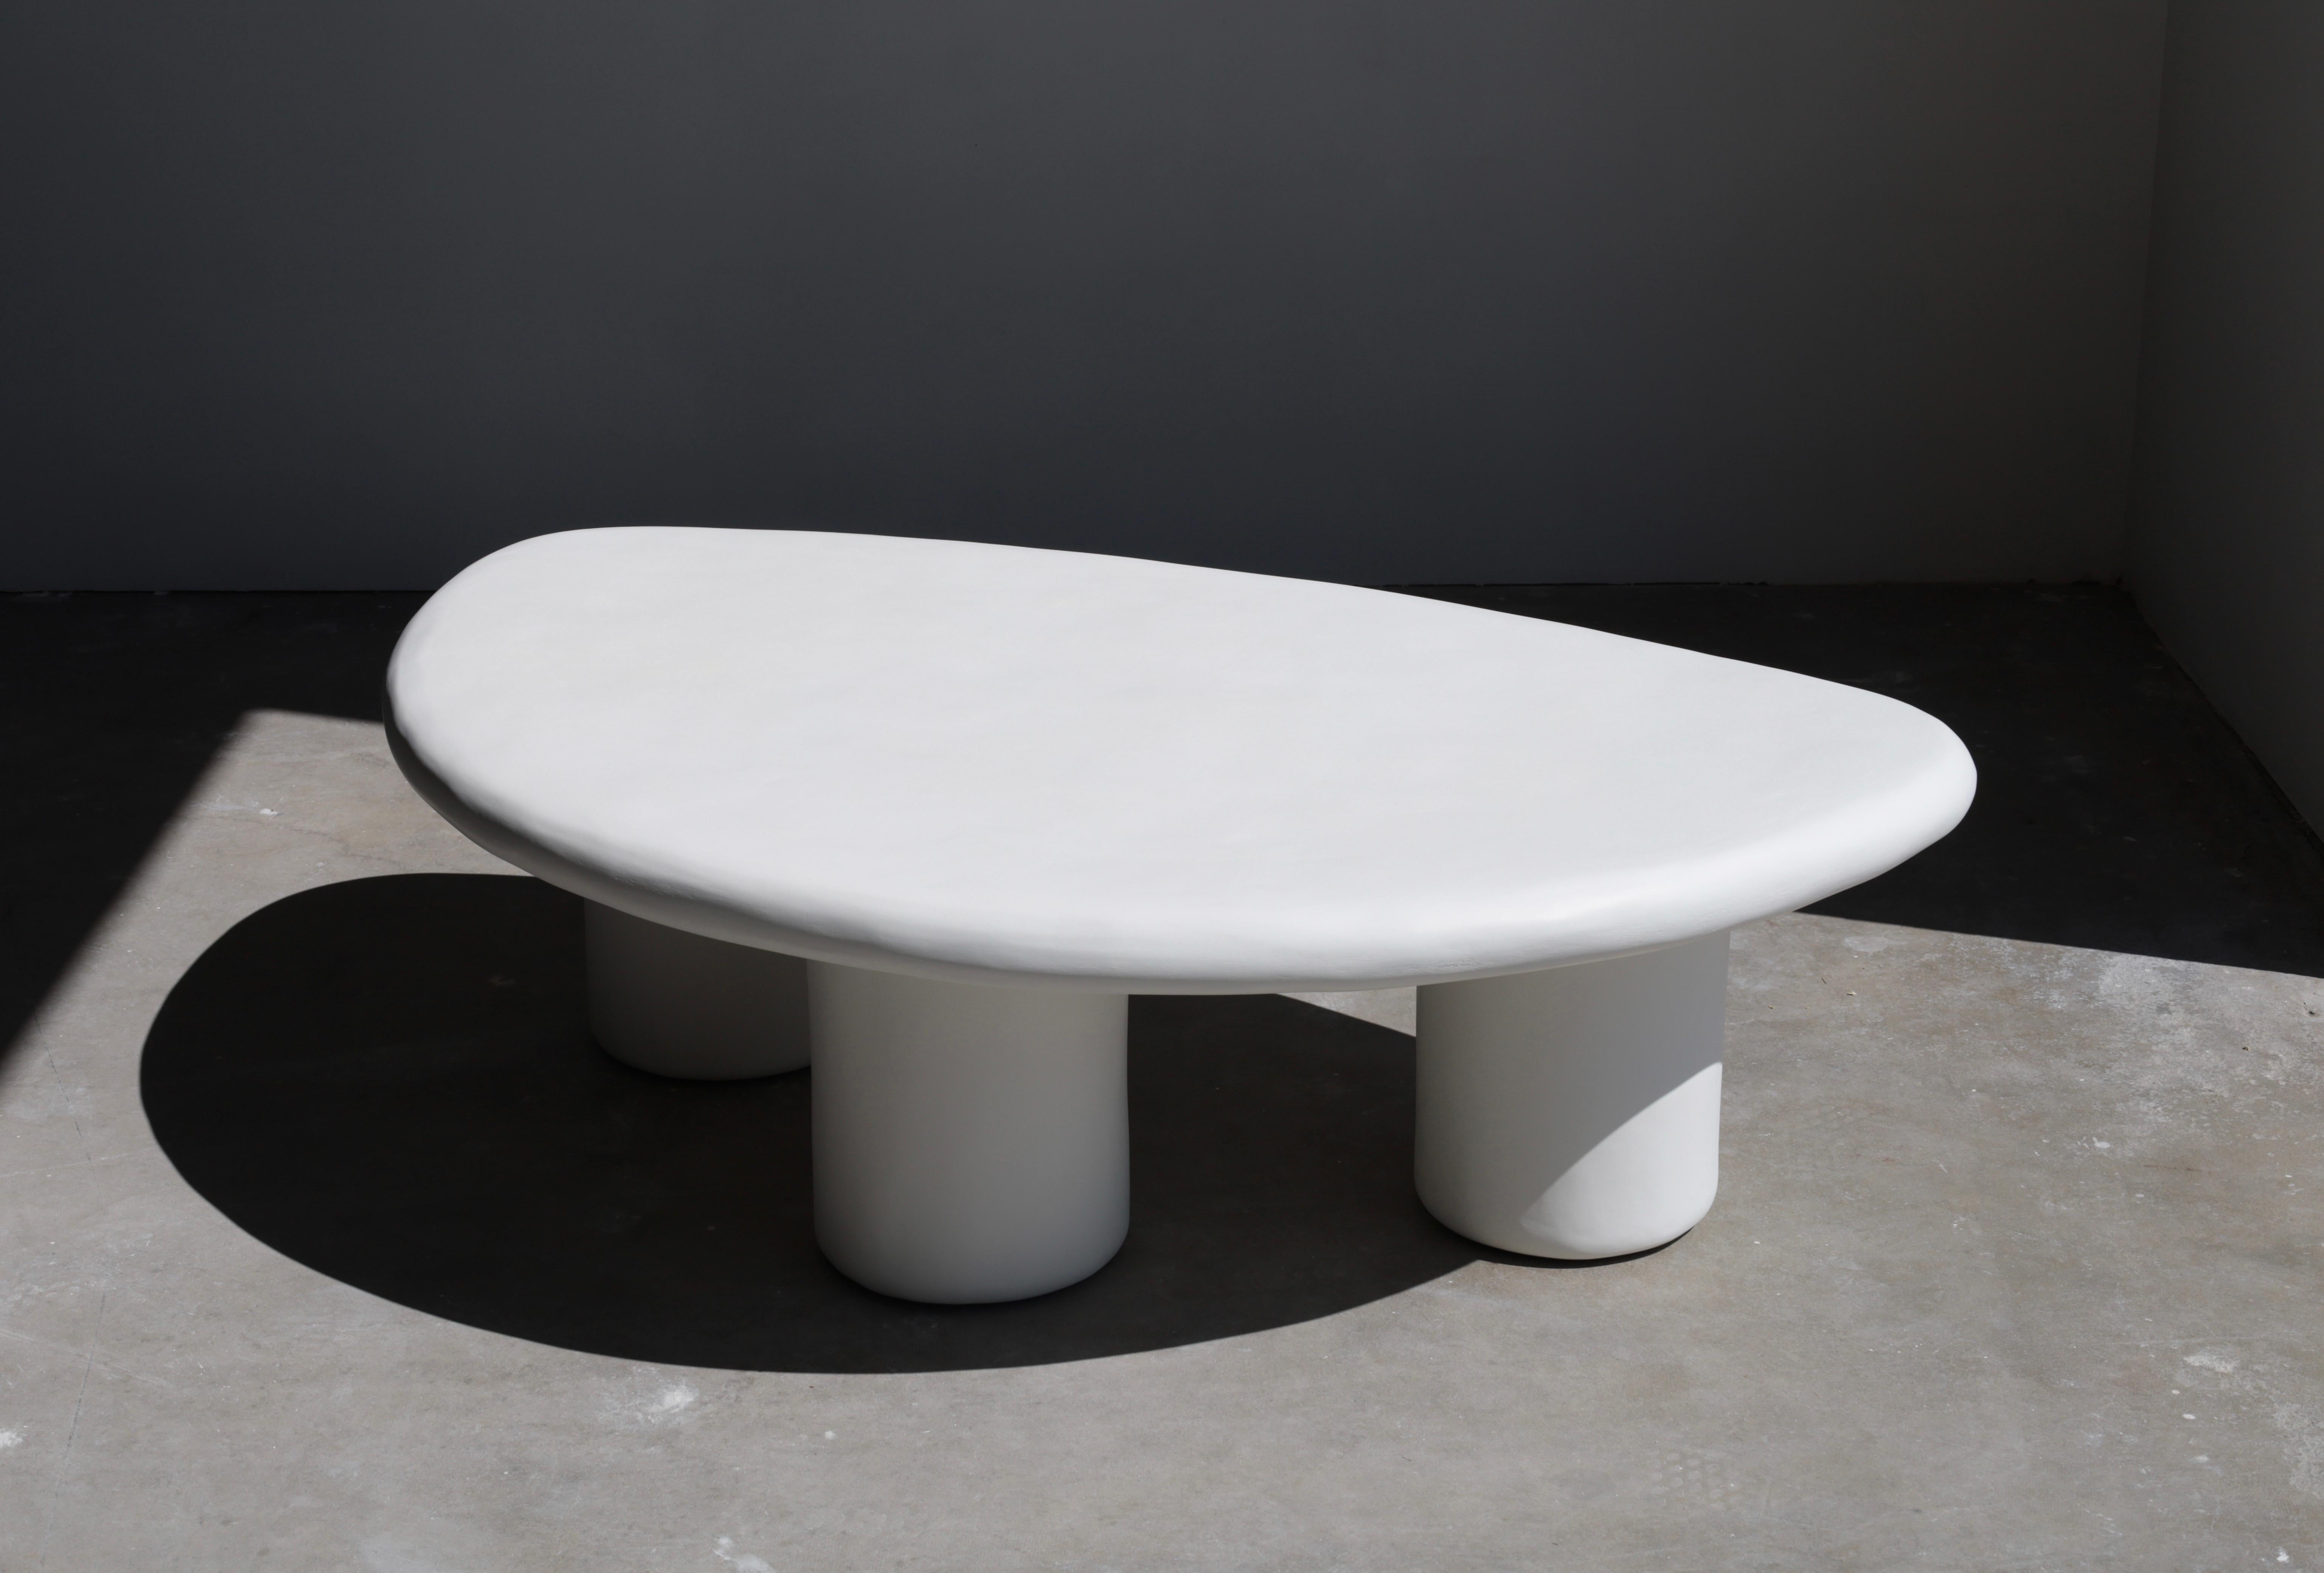 a very unique shape & playful design make this three-legged coffee table a perfect centerpiece to your living space

each öken house studio piece is handmade & made to order by a small team of plaster artisans and we try to utilize local vendors